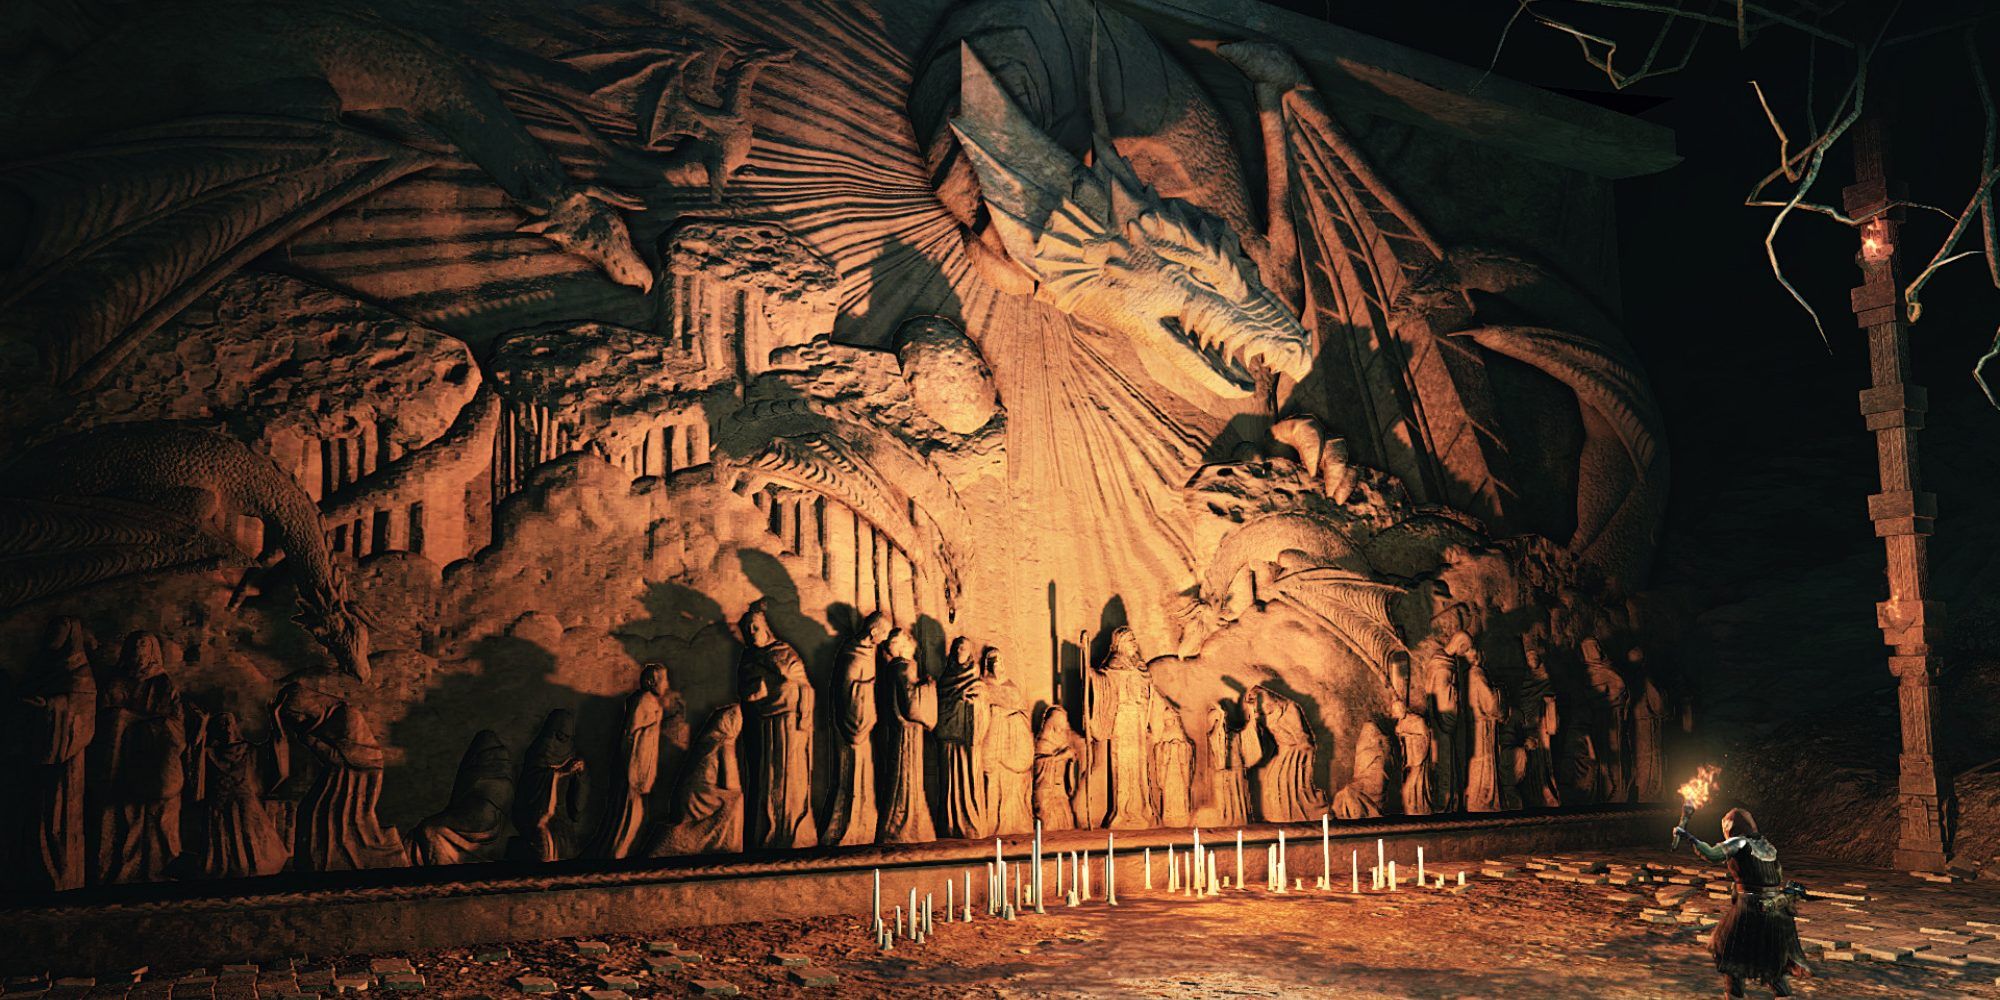 A wall carving in Dark Souls 2, Crown of The Sunken King, depicting Sinh and the people of Shulva.